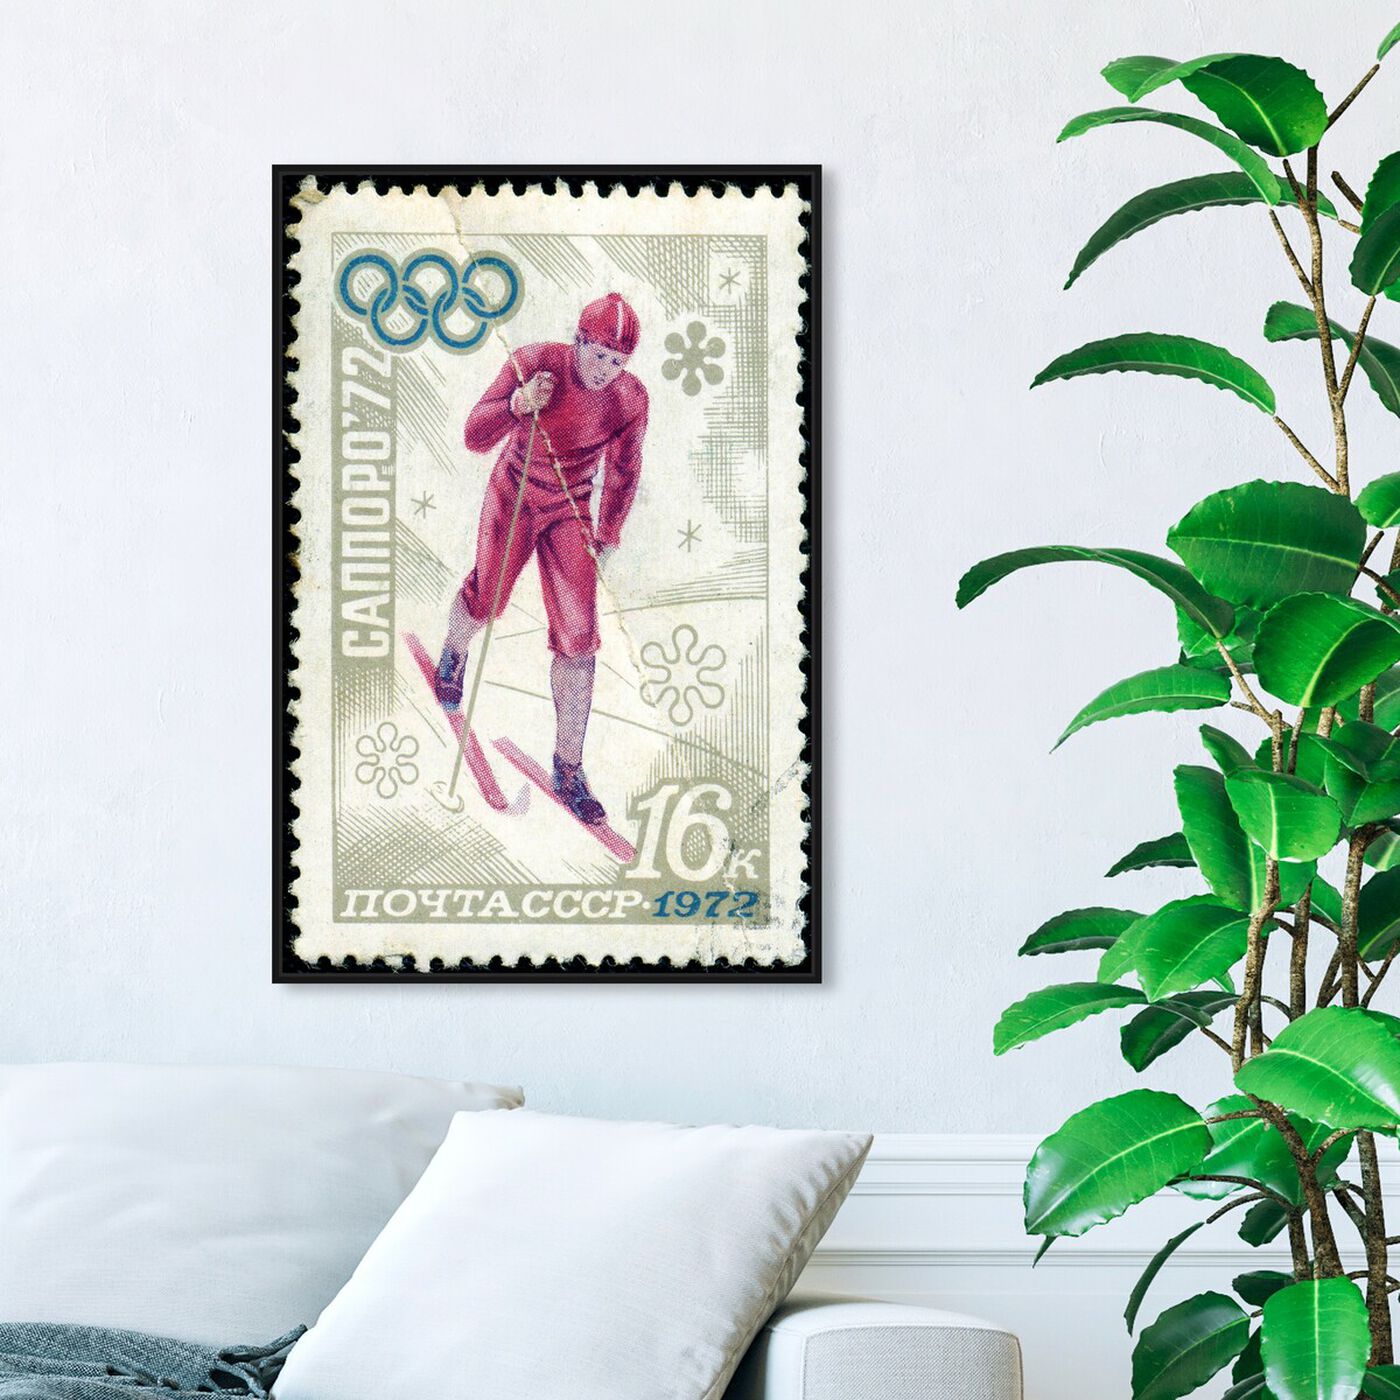 Hanging view of Winter of 1972 featuring sports and teams and skiing art.